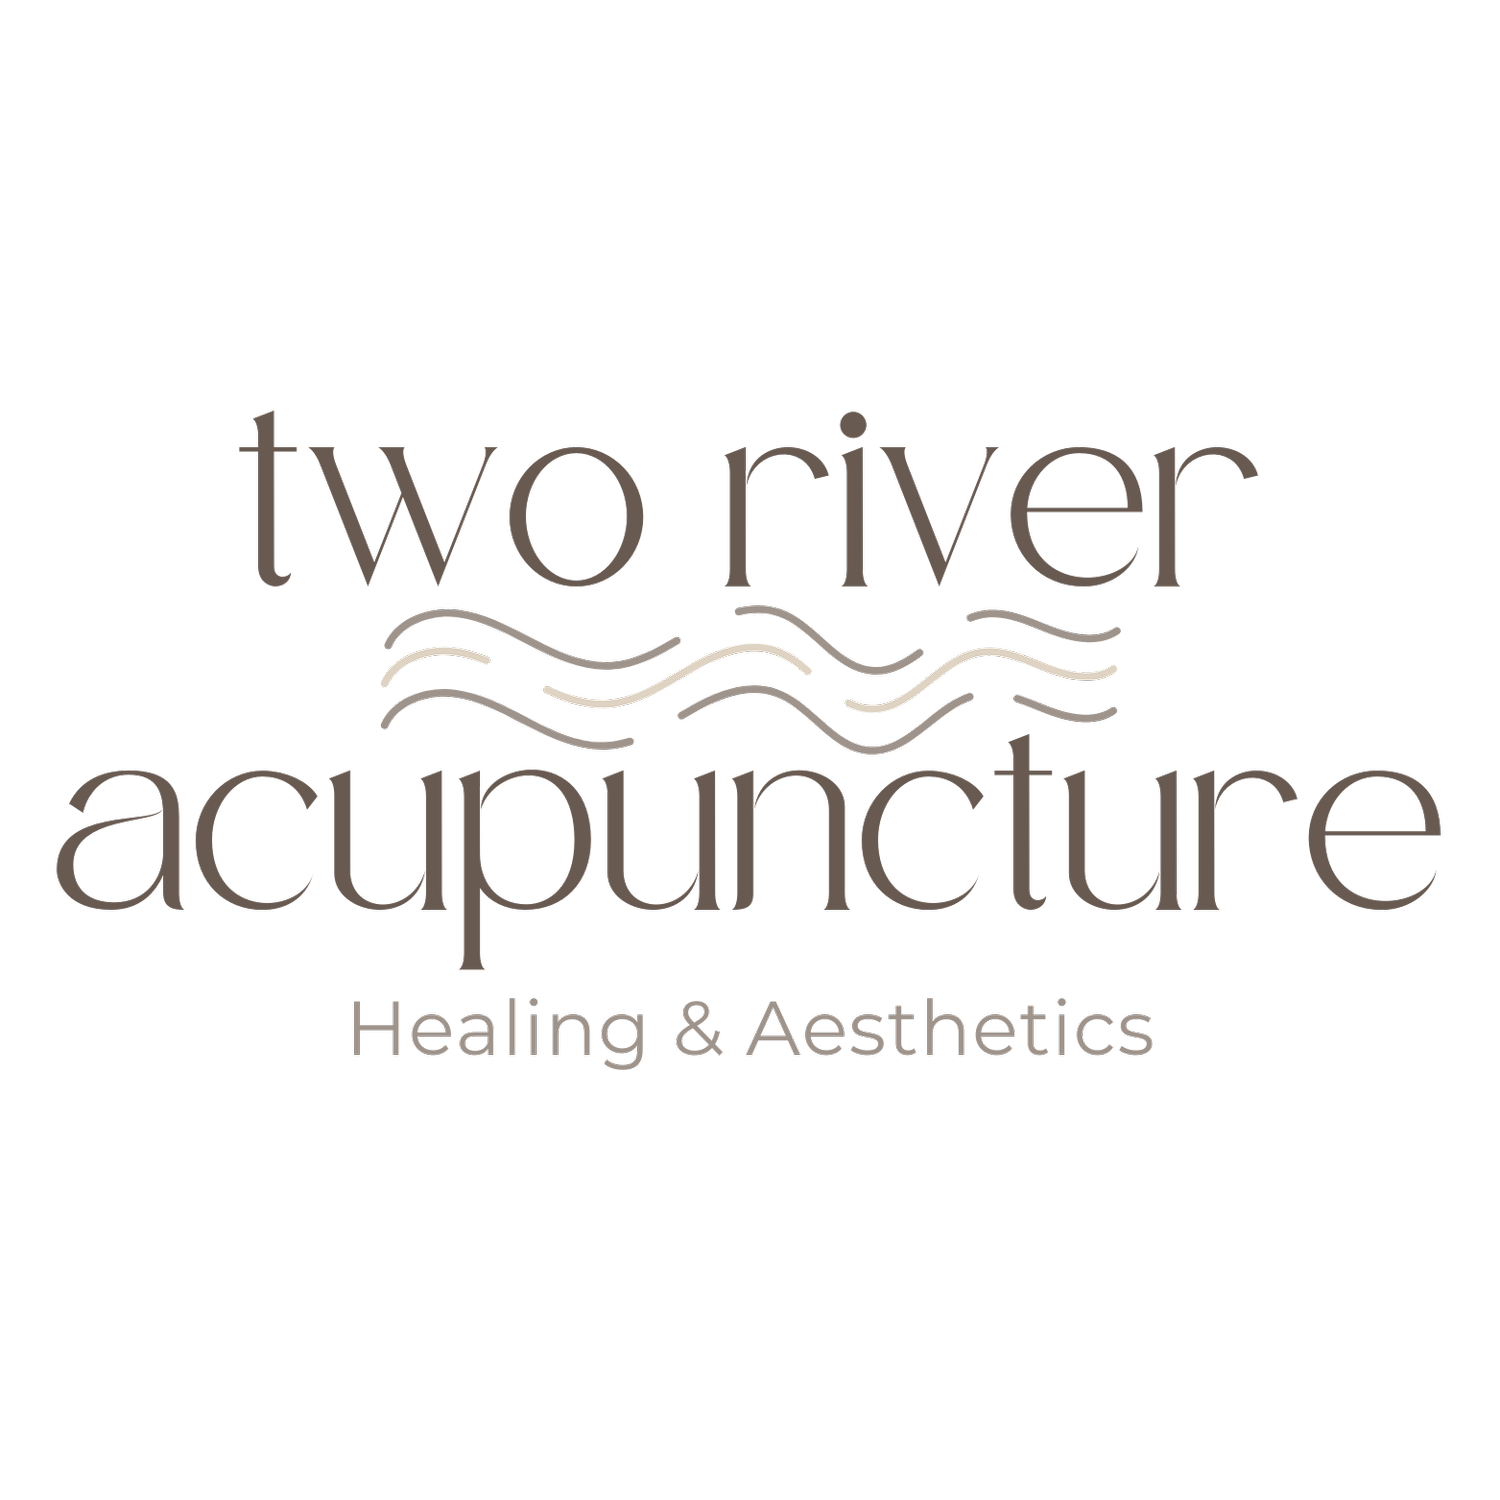 Two River Acupuncture